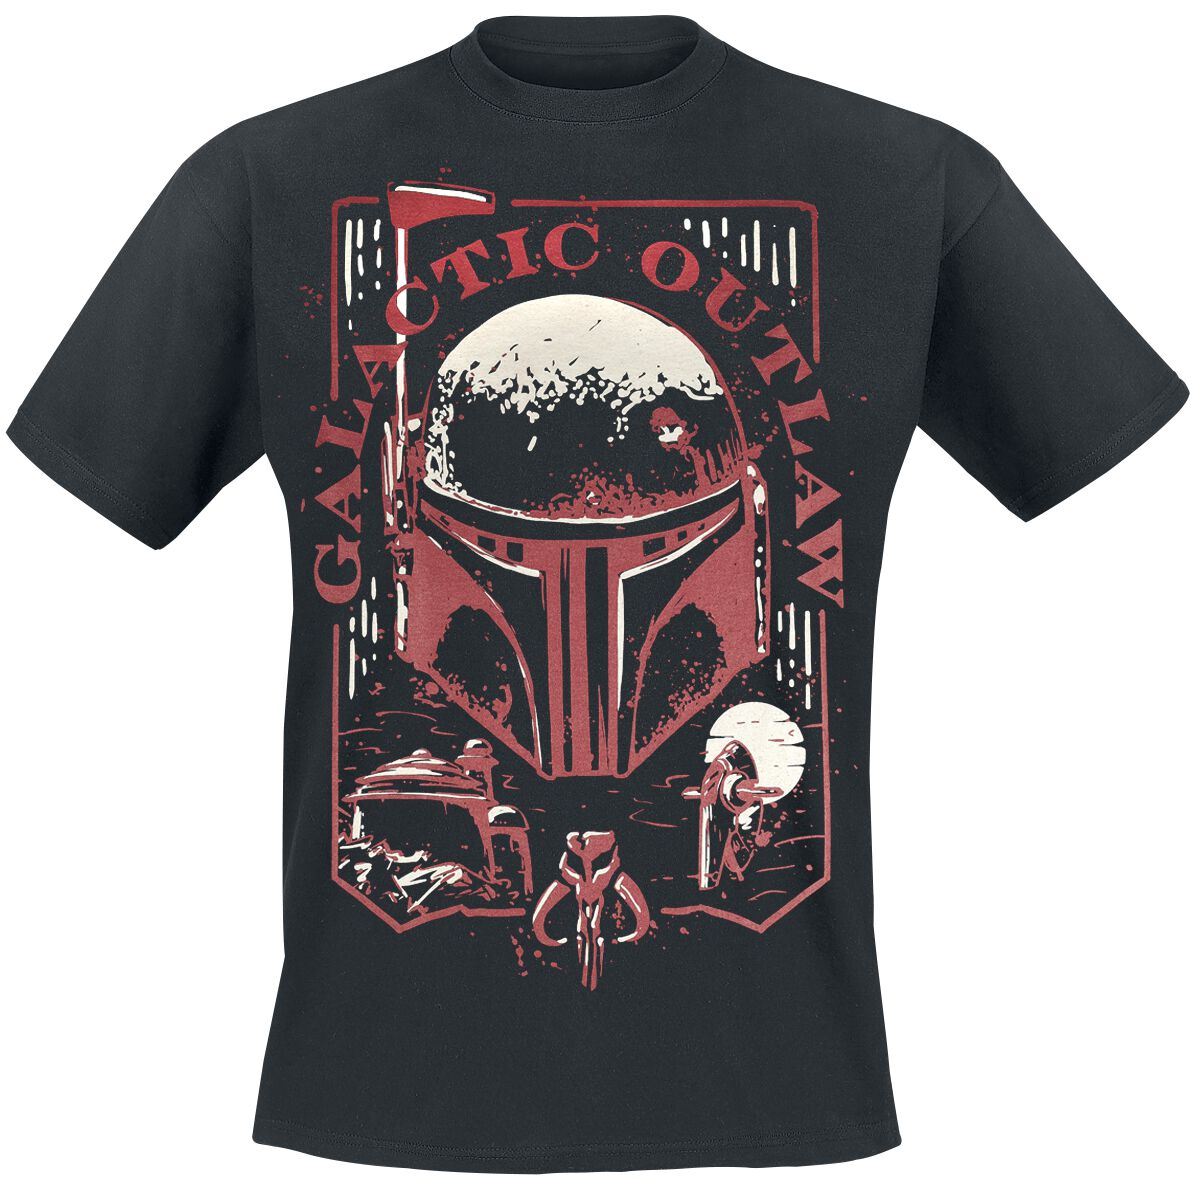 Star Wars The Book Of Boba Fett - Galactic Outlaw T-Shirt schwarz in L